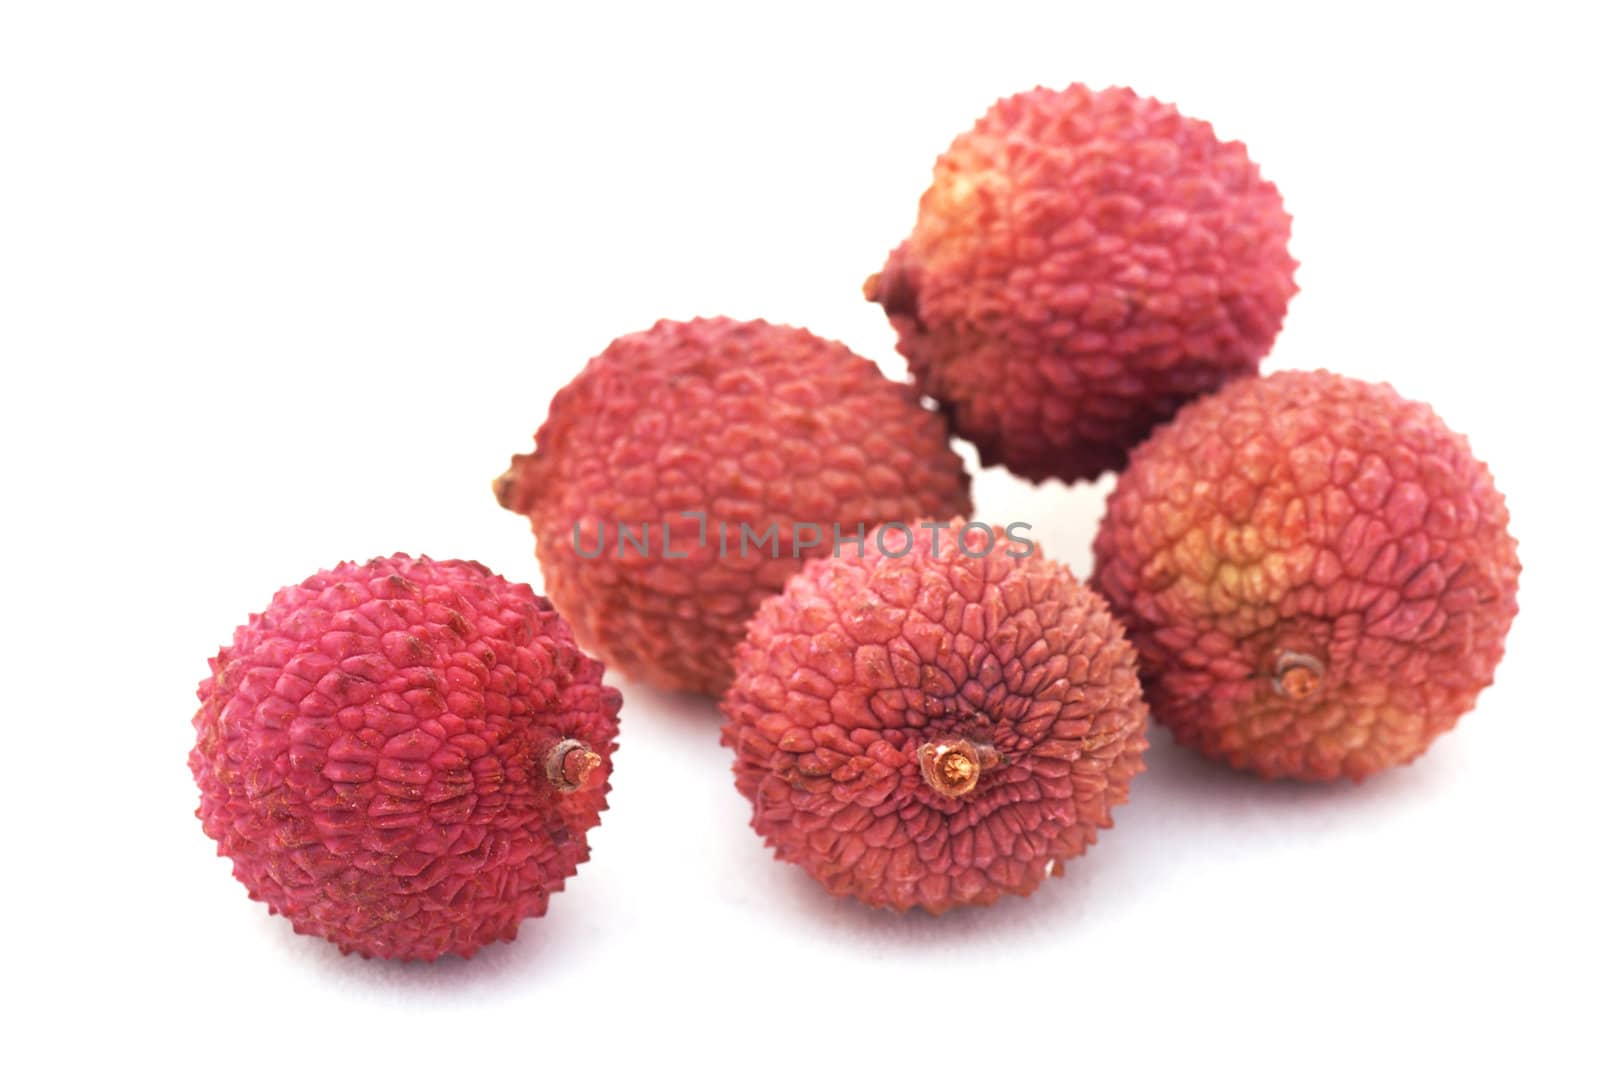 Five colorful lychees isolated on a white background.